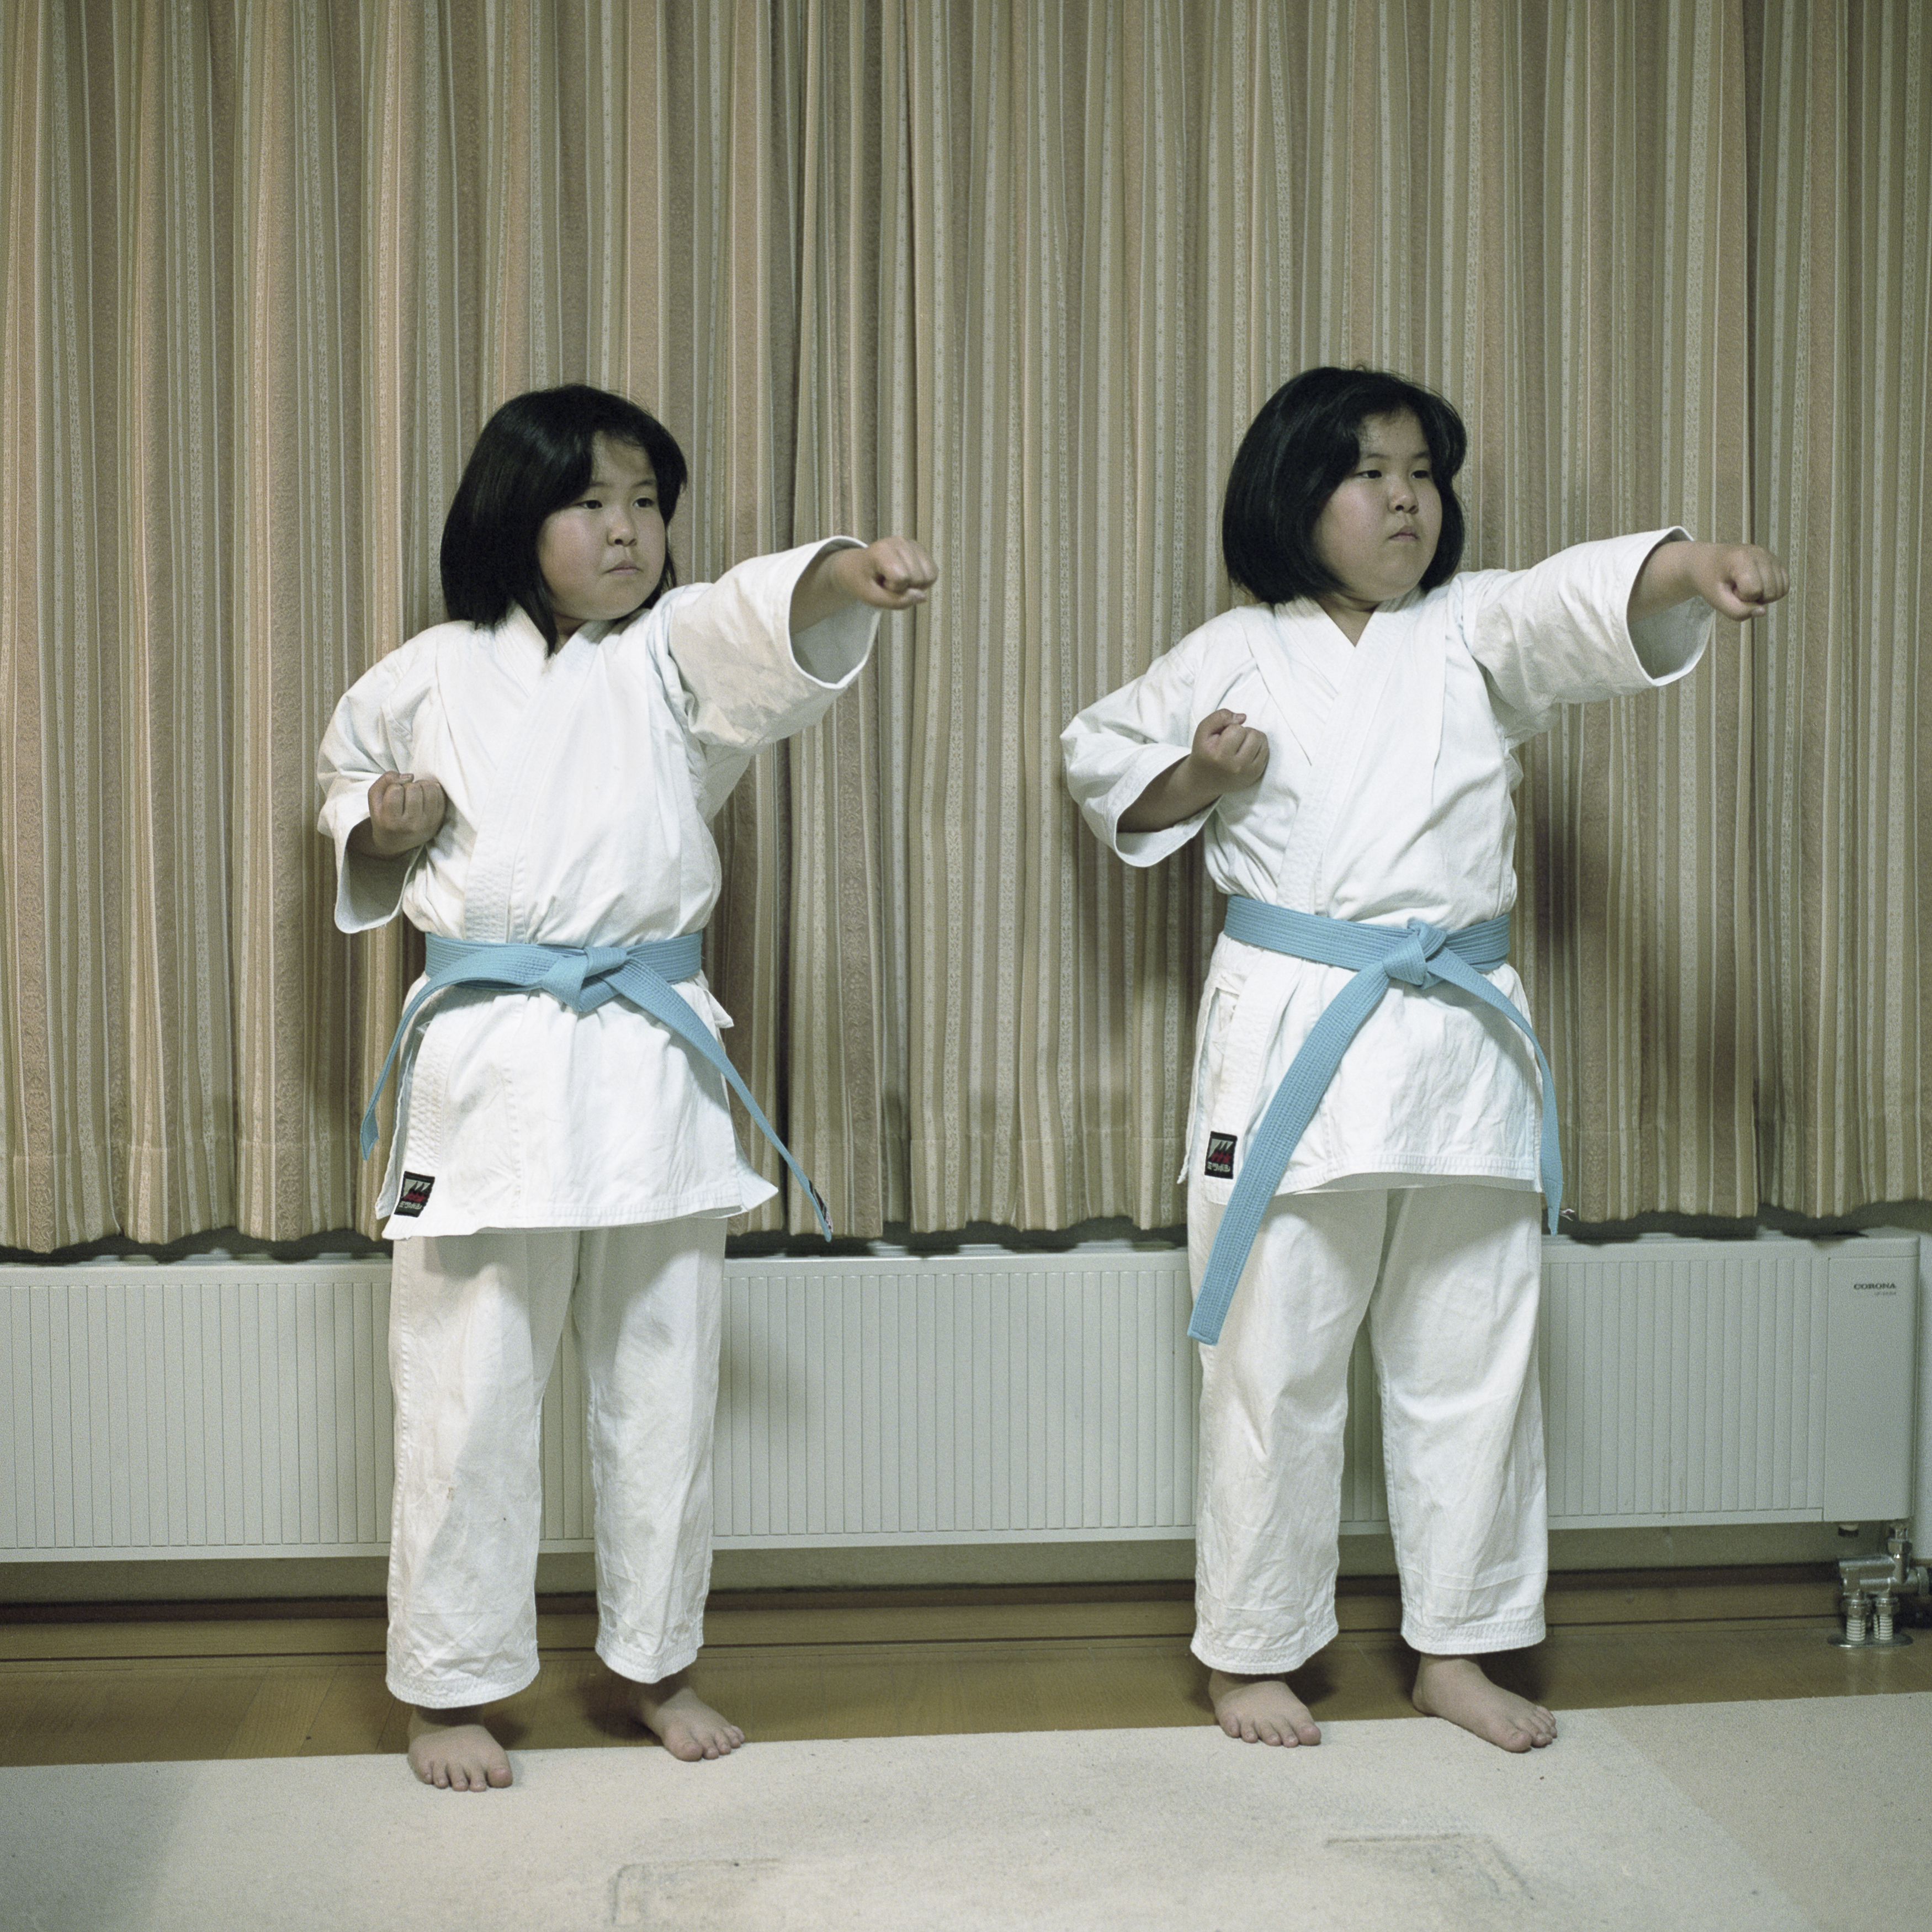 Nibutani, Hokkaido, Japan 2015 
Two Ainu sisters demonstrate karate forms in the house where they live with their parents. They study martial arts in the village cultural center where they also study Ainu language.